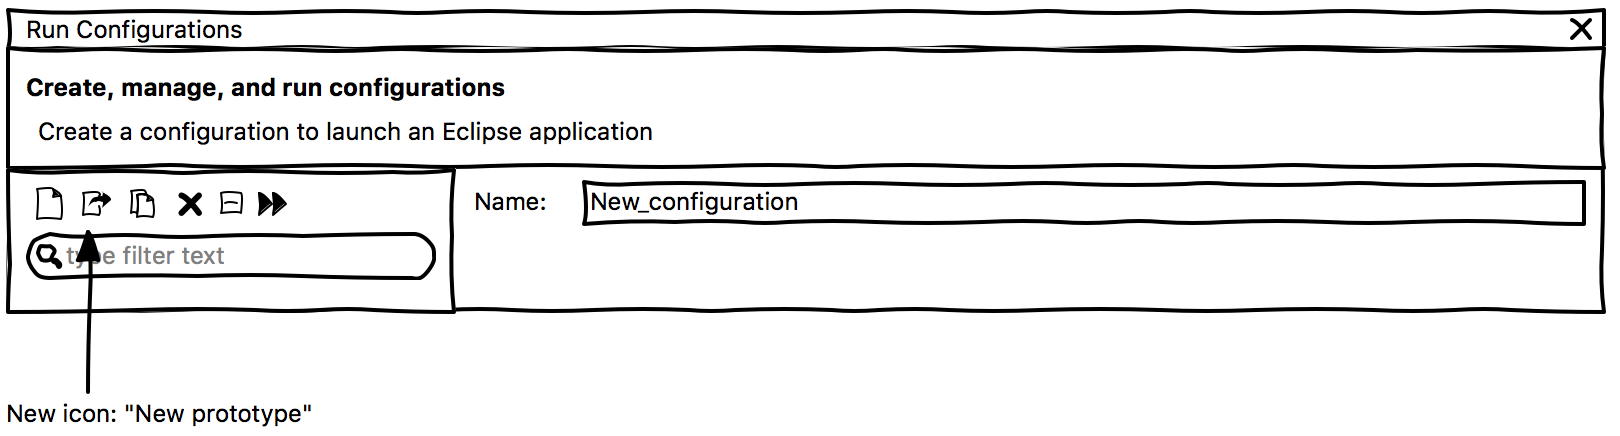 Run Configurations New Template Icon v4.png